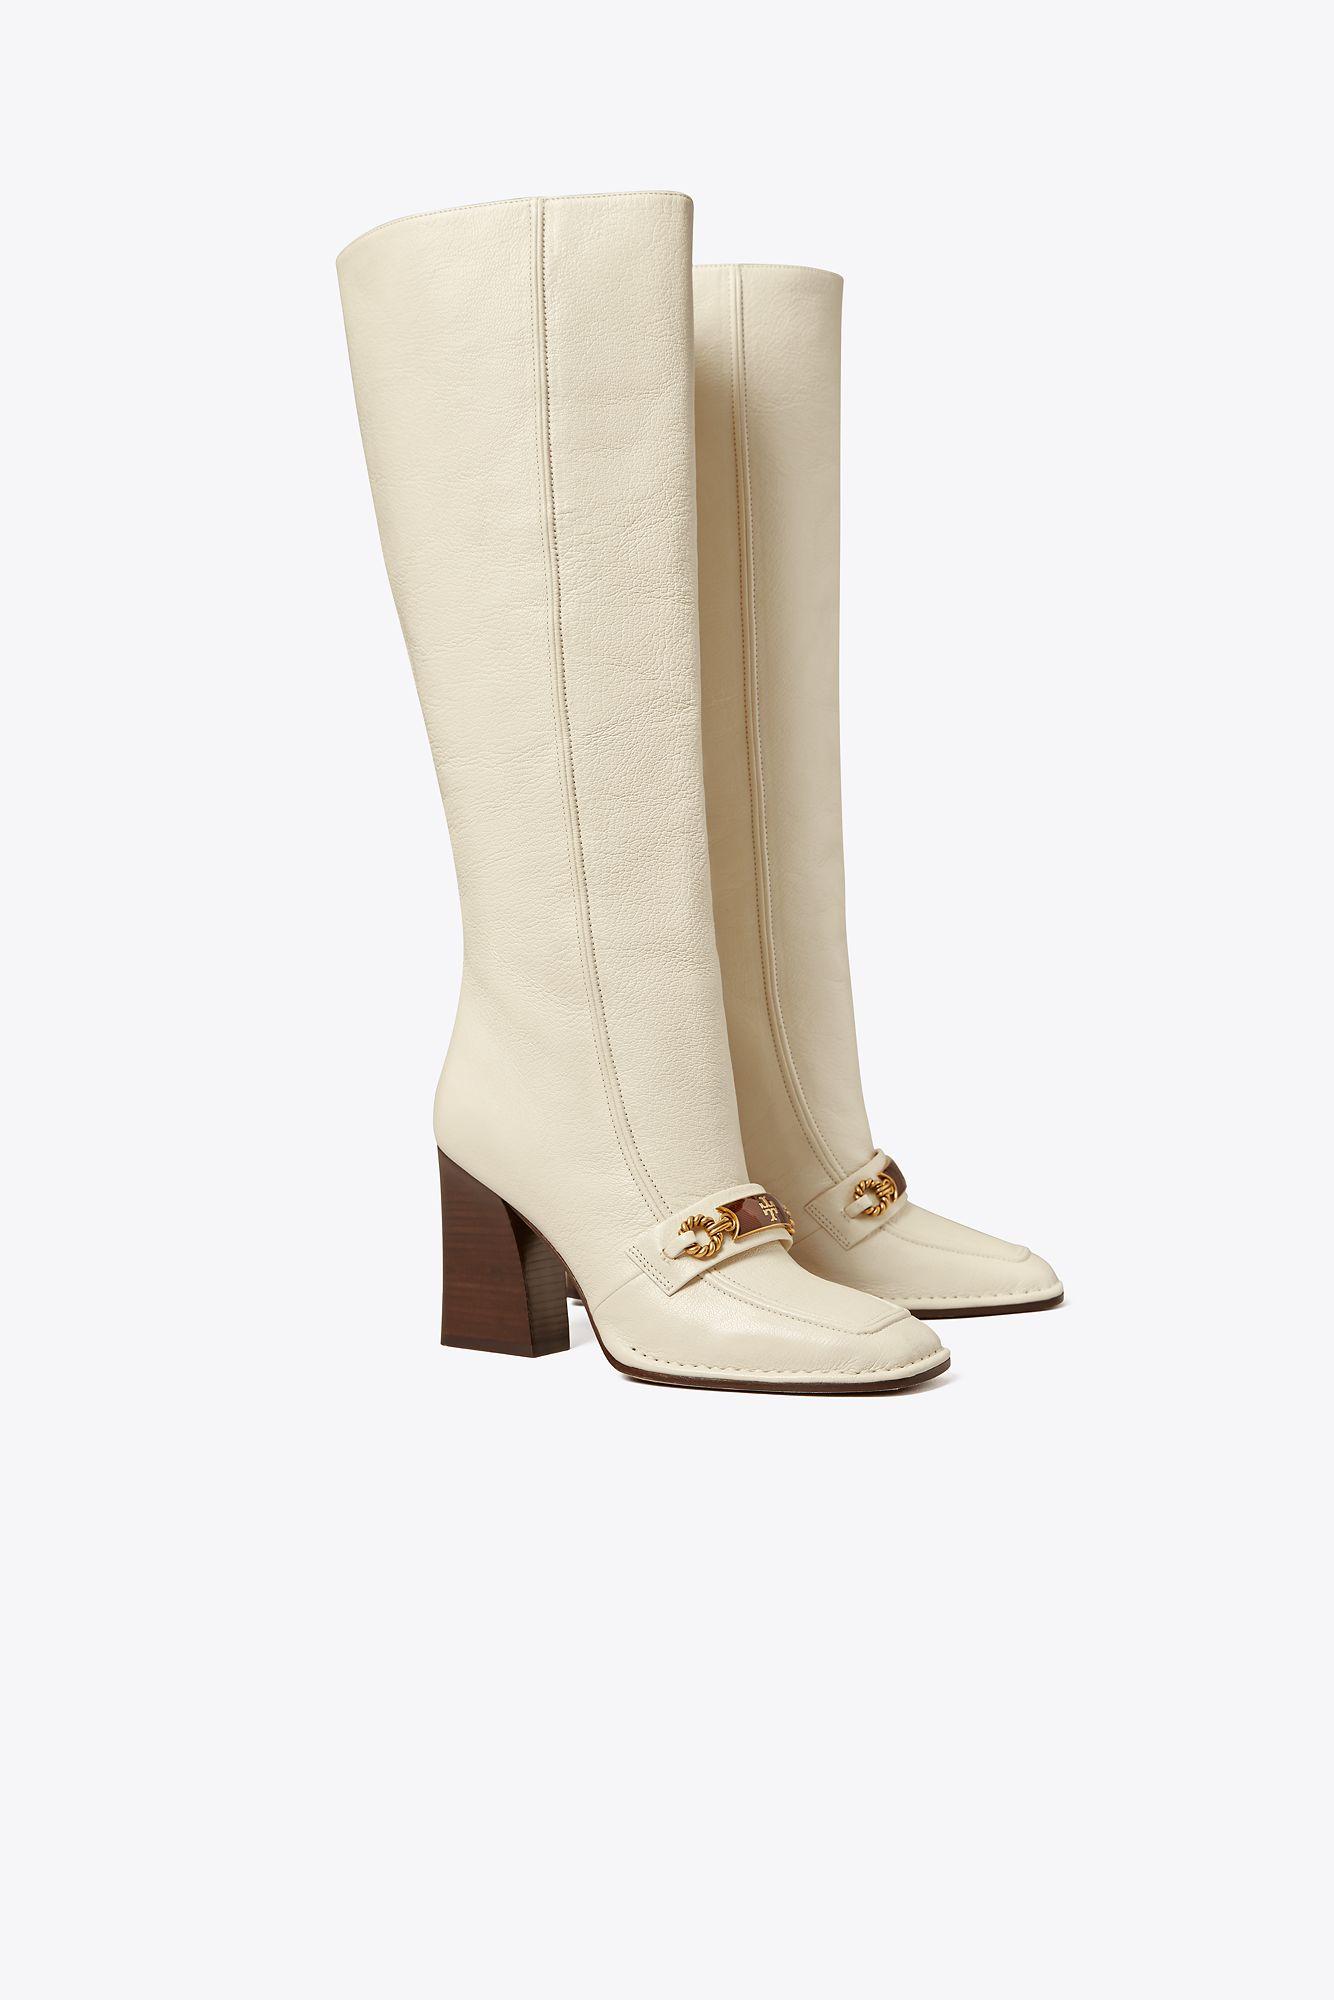 Tory Burch Vintage Plaque Tall Heel Boot in White | Lyst